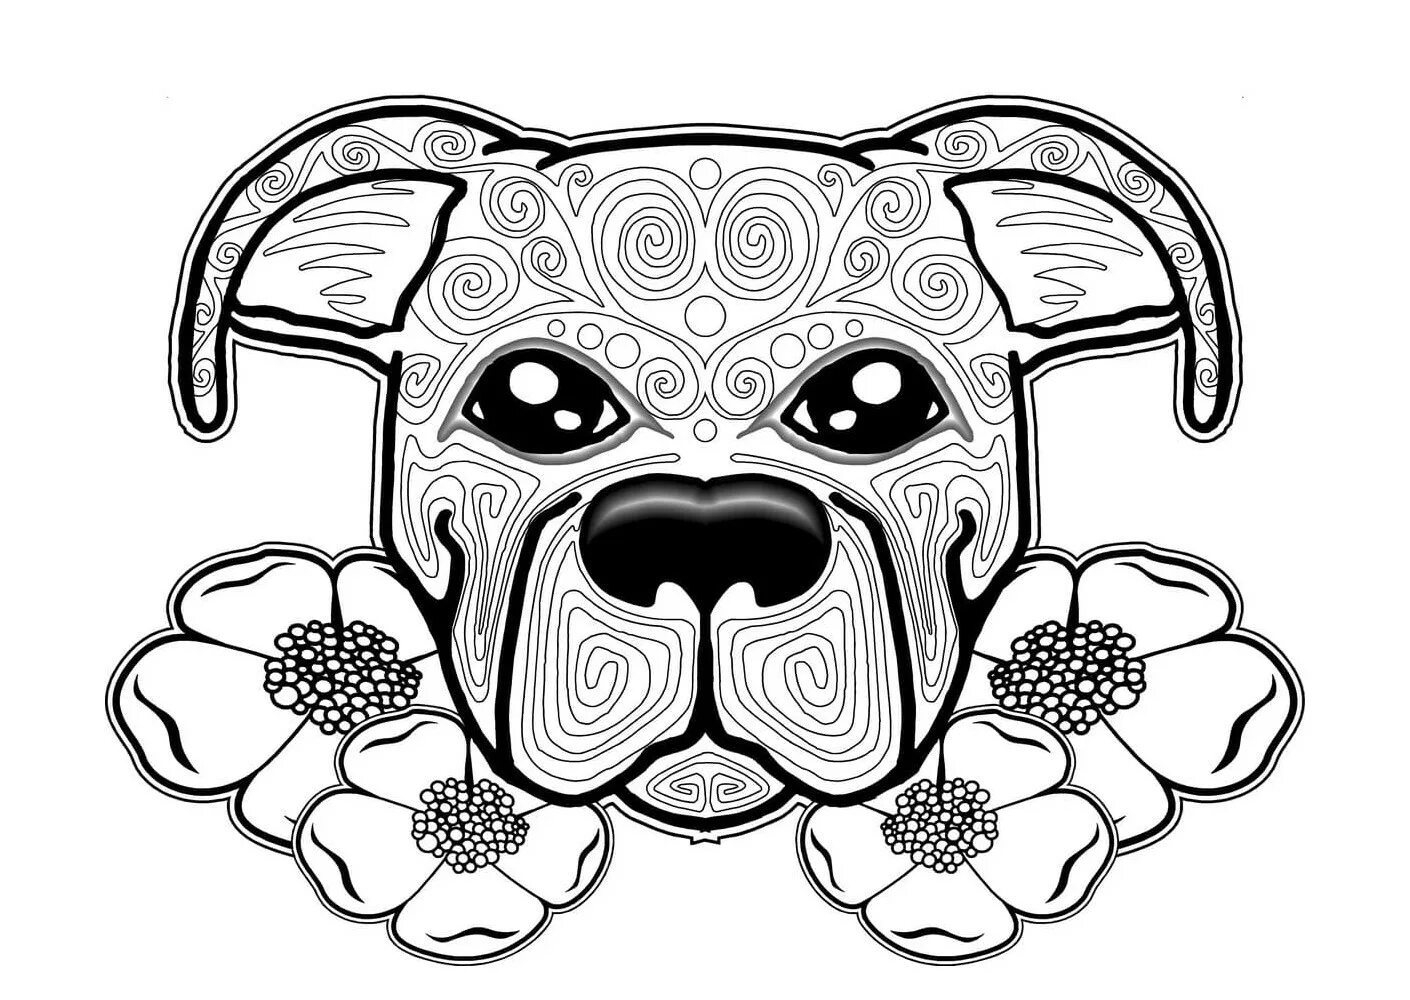 Coloring book playful dog with patterns